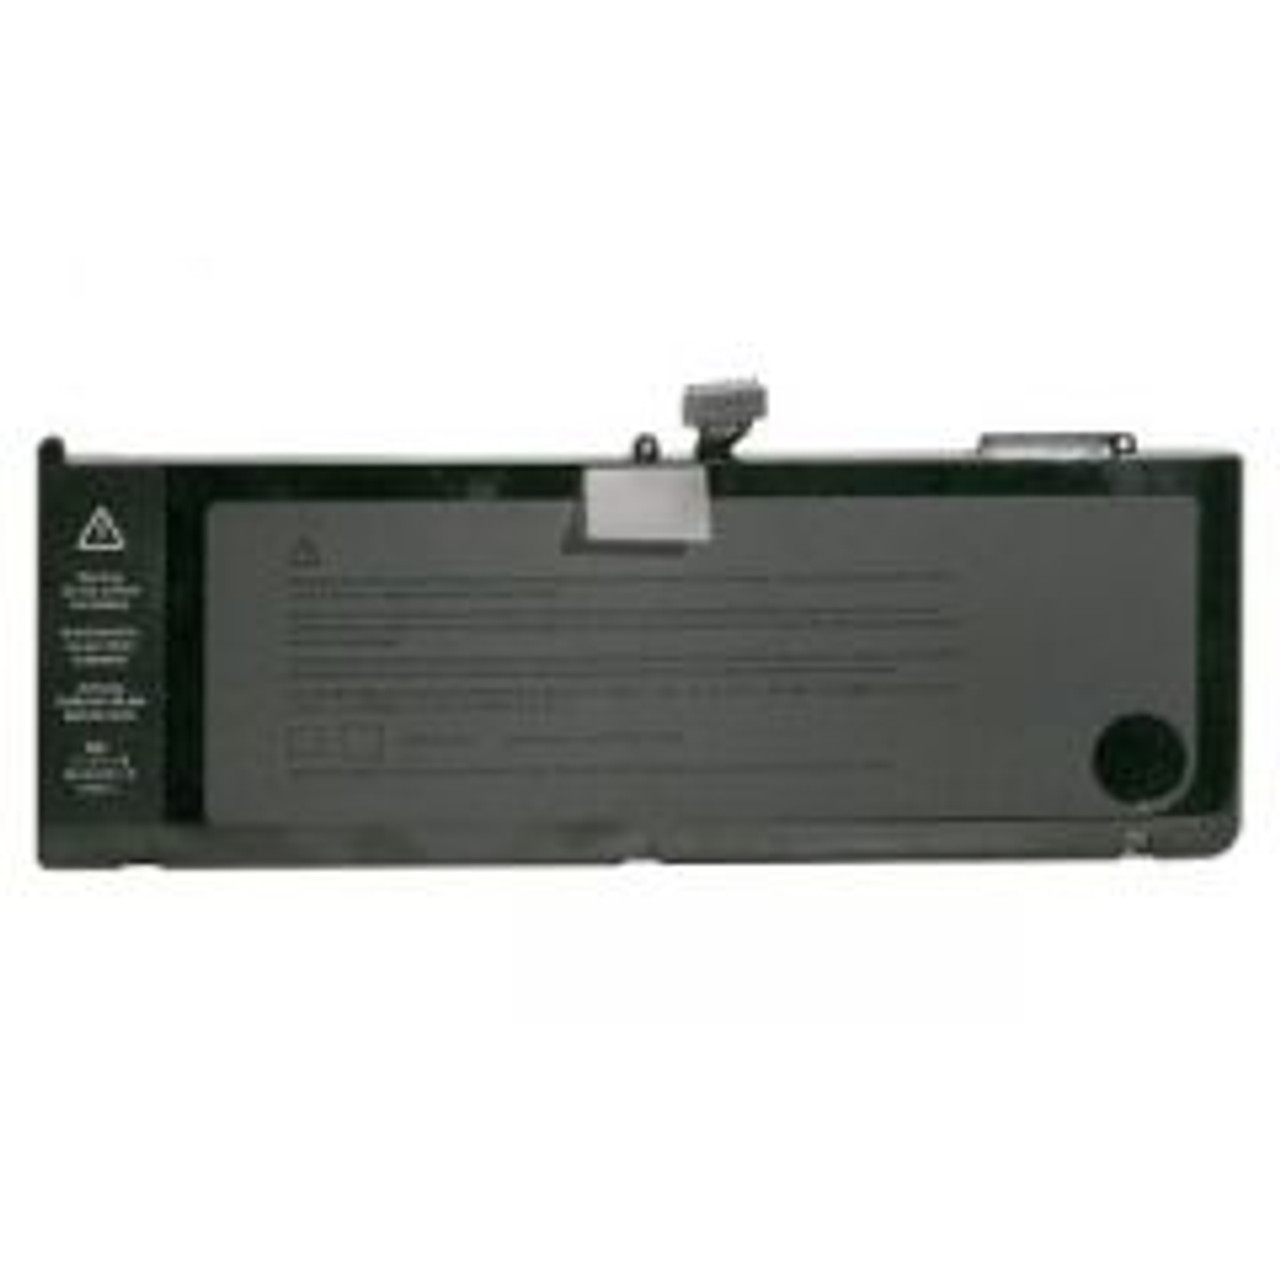 661-5844 | Apple | 77.5-Watts-Hours (Wh) 10.95V Li-Ion Laptop Battery For Macbook Pro 15